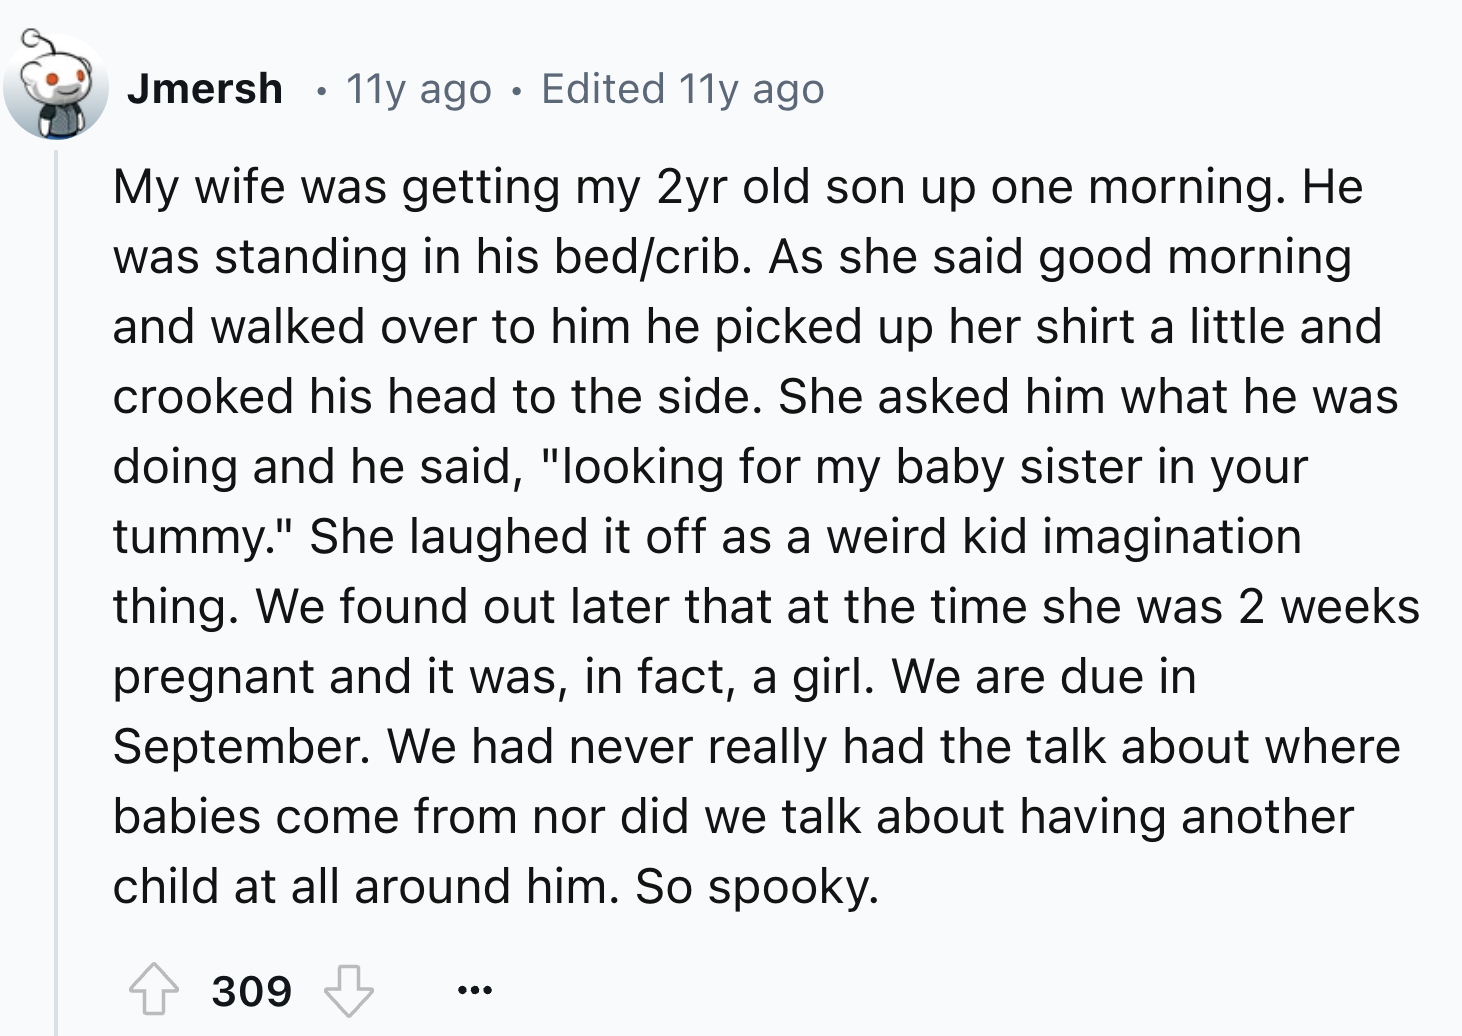 screenshot - . Jmersh 11y ago Edited 11y ago. My wife was getting my 2yr old son up one morning. He was standing in his bedcrib. As she said good morning and walked over to him he picked up her shirt a little and crooked his head to the side. She asked hi